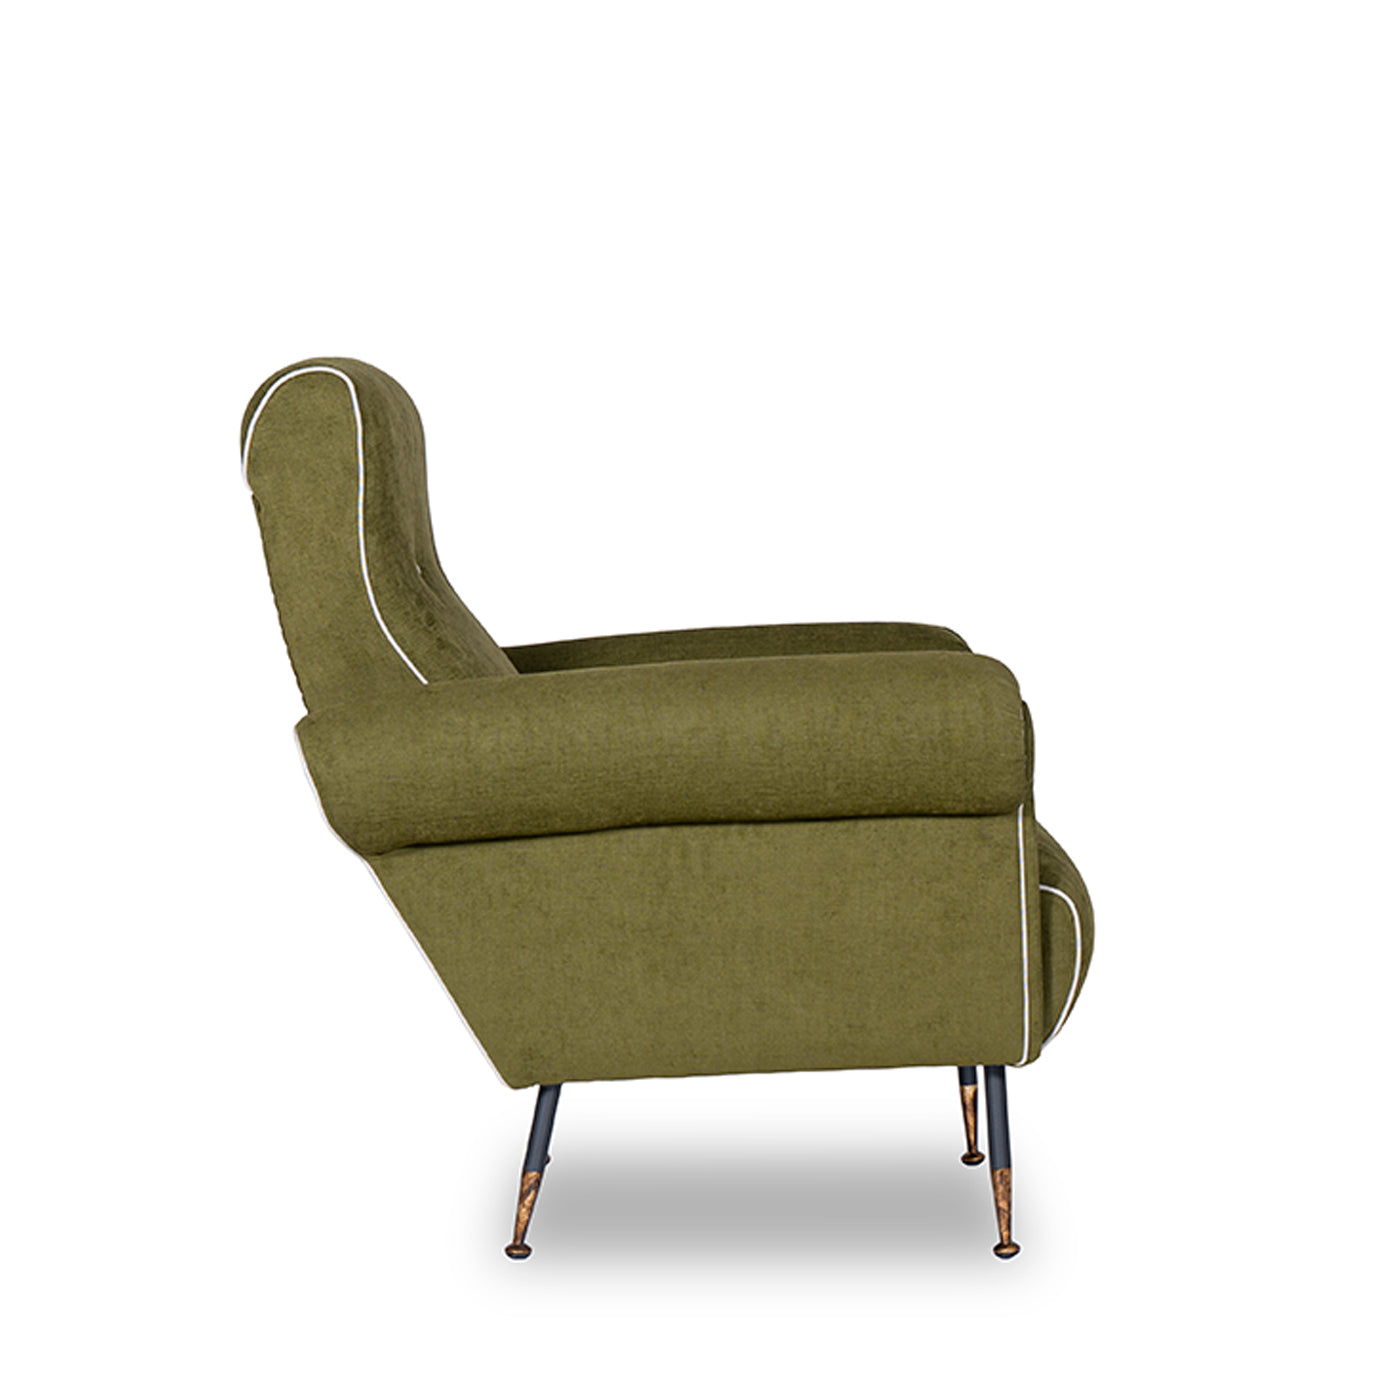 Pulce Armchair Tribeca Collection - Alternative view 3